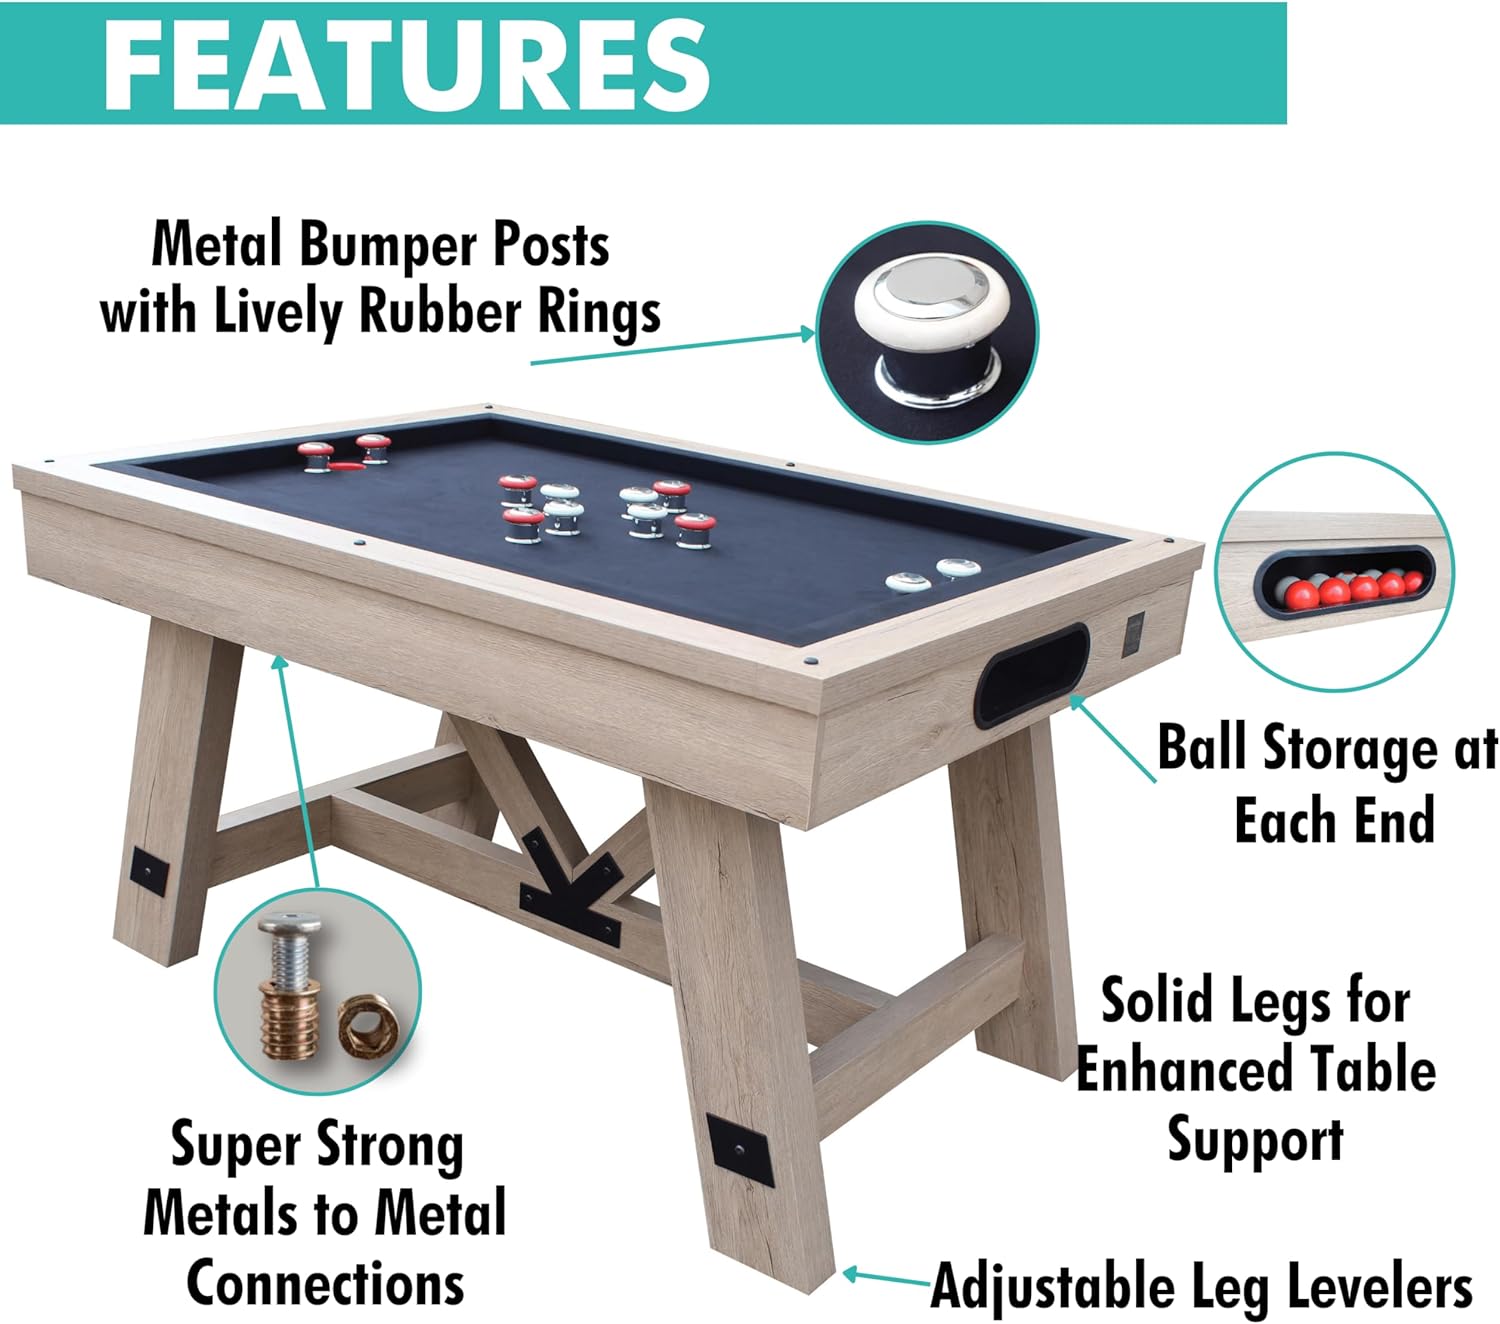 Baddah Bing Bumper Pool Table 54" Perfect for All Ages - Includes 2 Cues, 10 balls and more